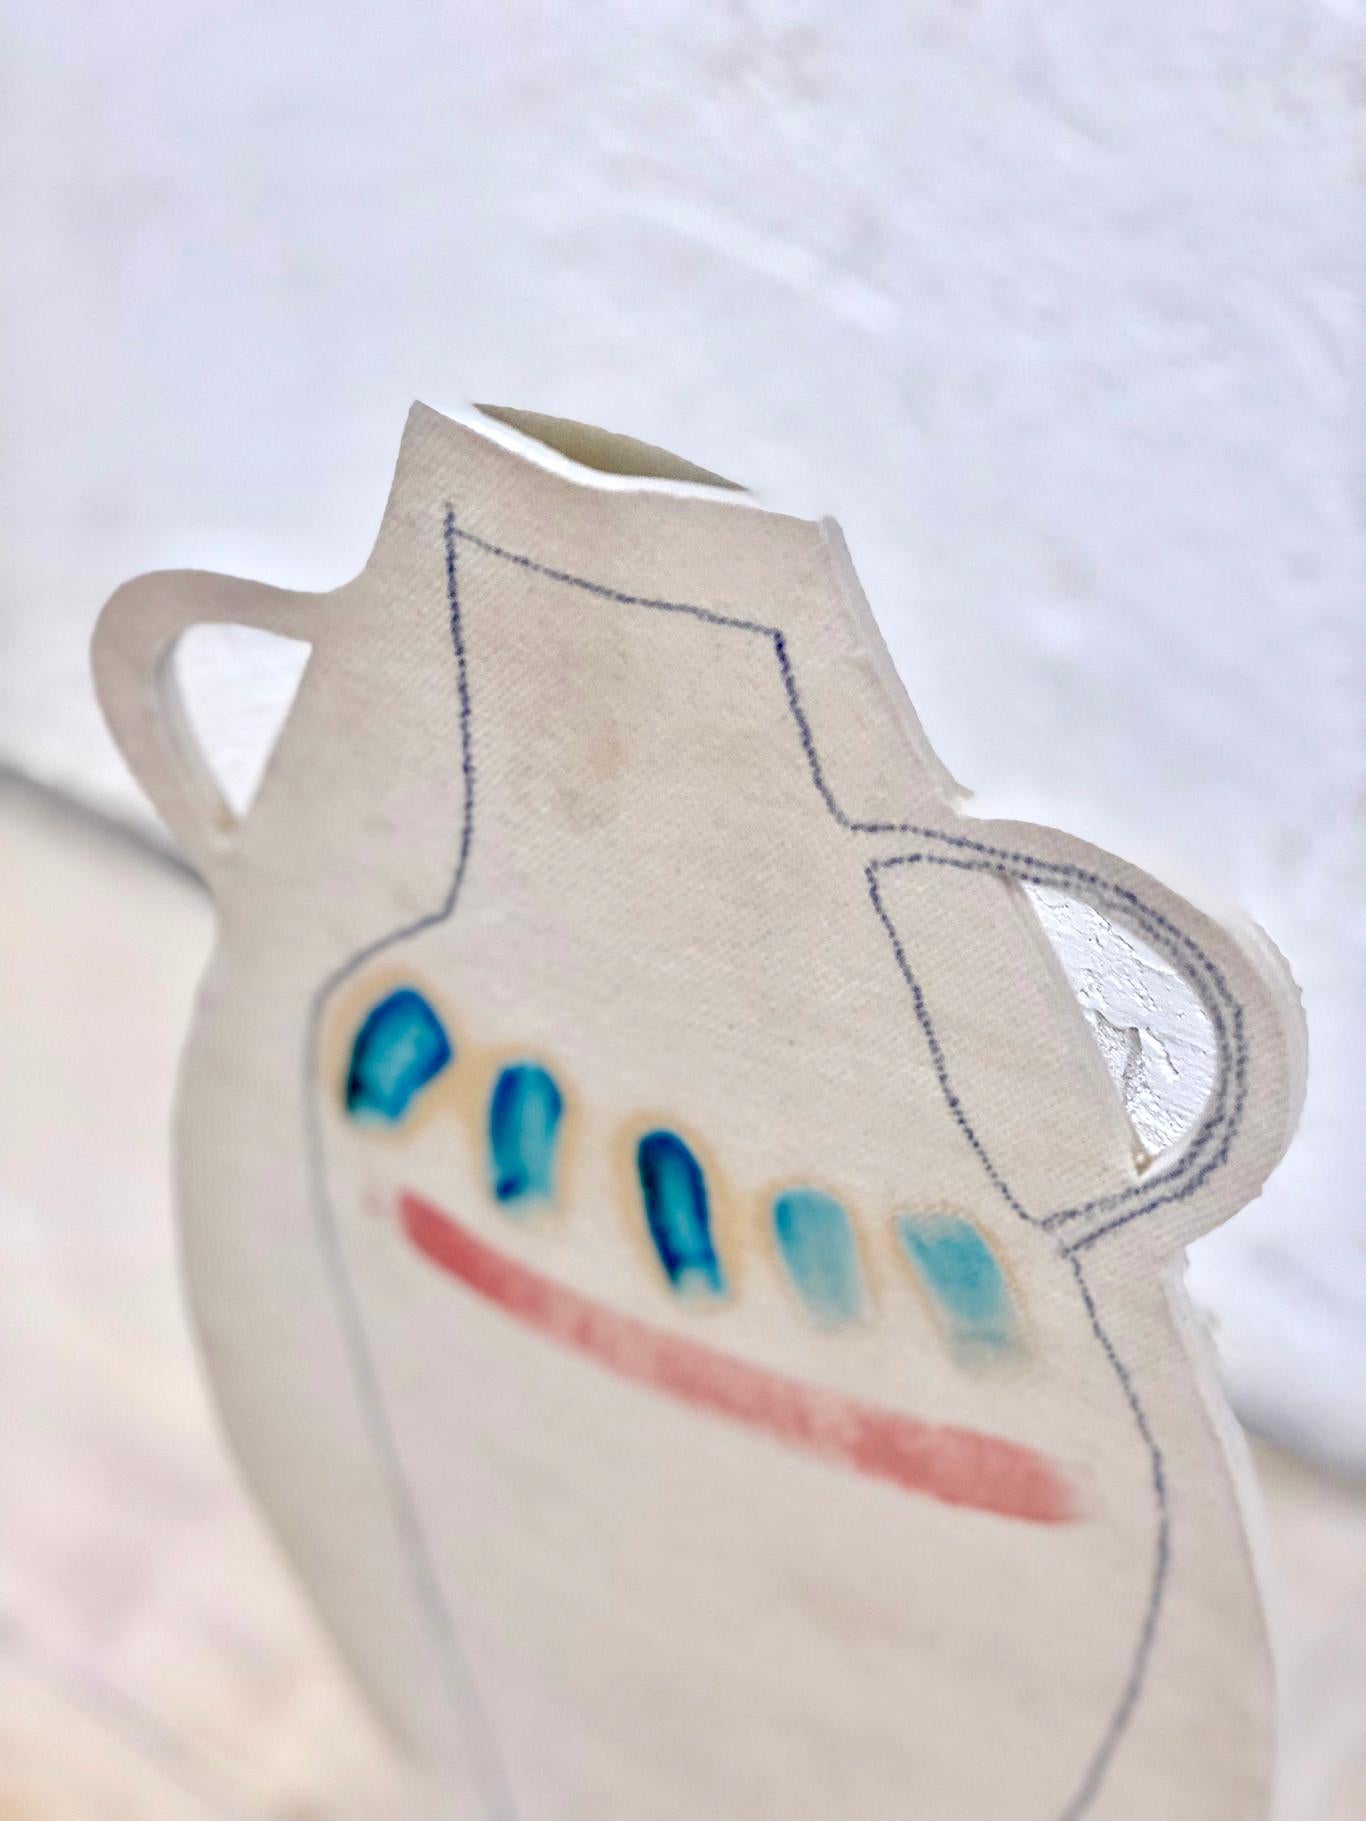 This hand painted double handled flat vase by Alison Owen is made through Owen's skillful hand-building technique, utilizing thin slabs of white stoneware clay, hand painted on the outside with glaze, and hand-drawn with underglaze pencil, with a